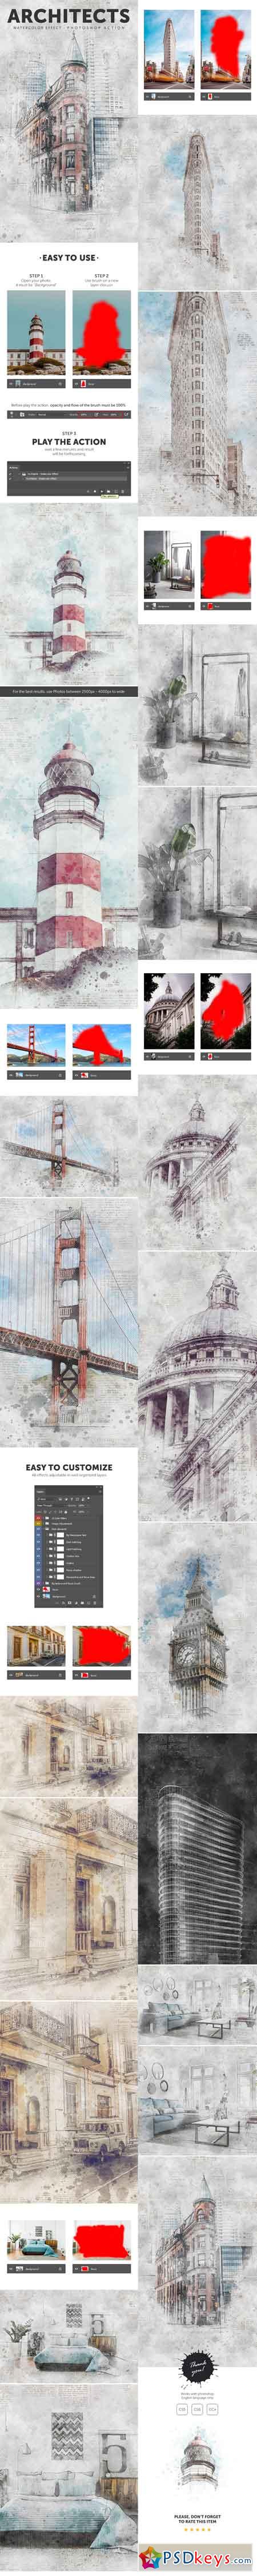 Architects - Watercolor Effect Photoshop Action 21364345